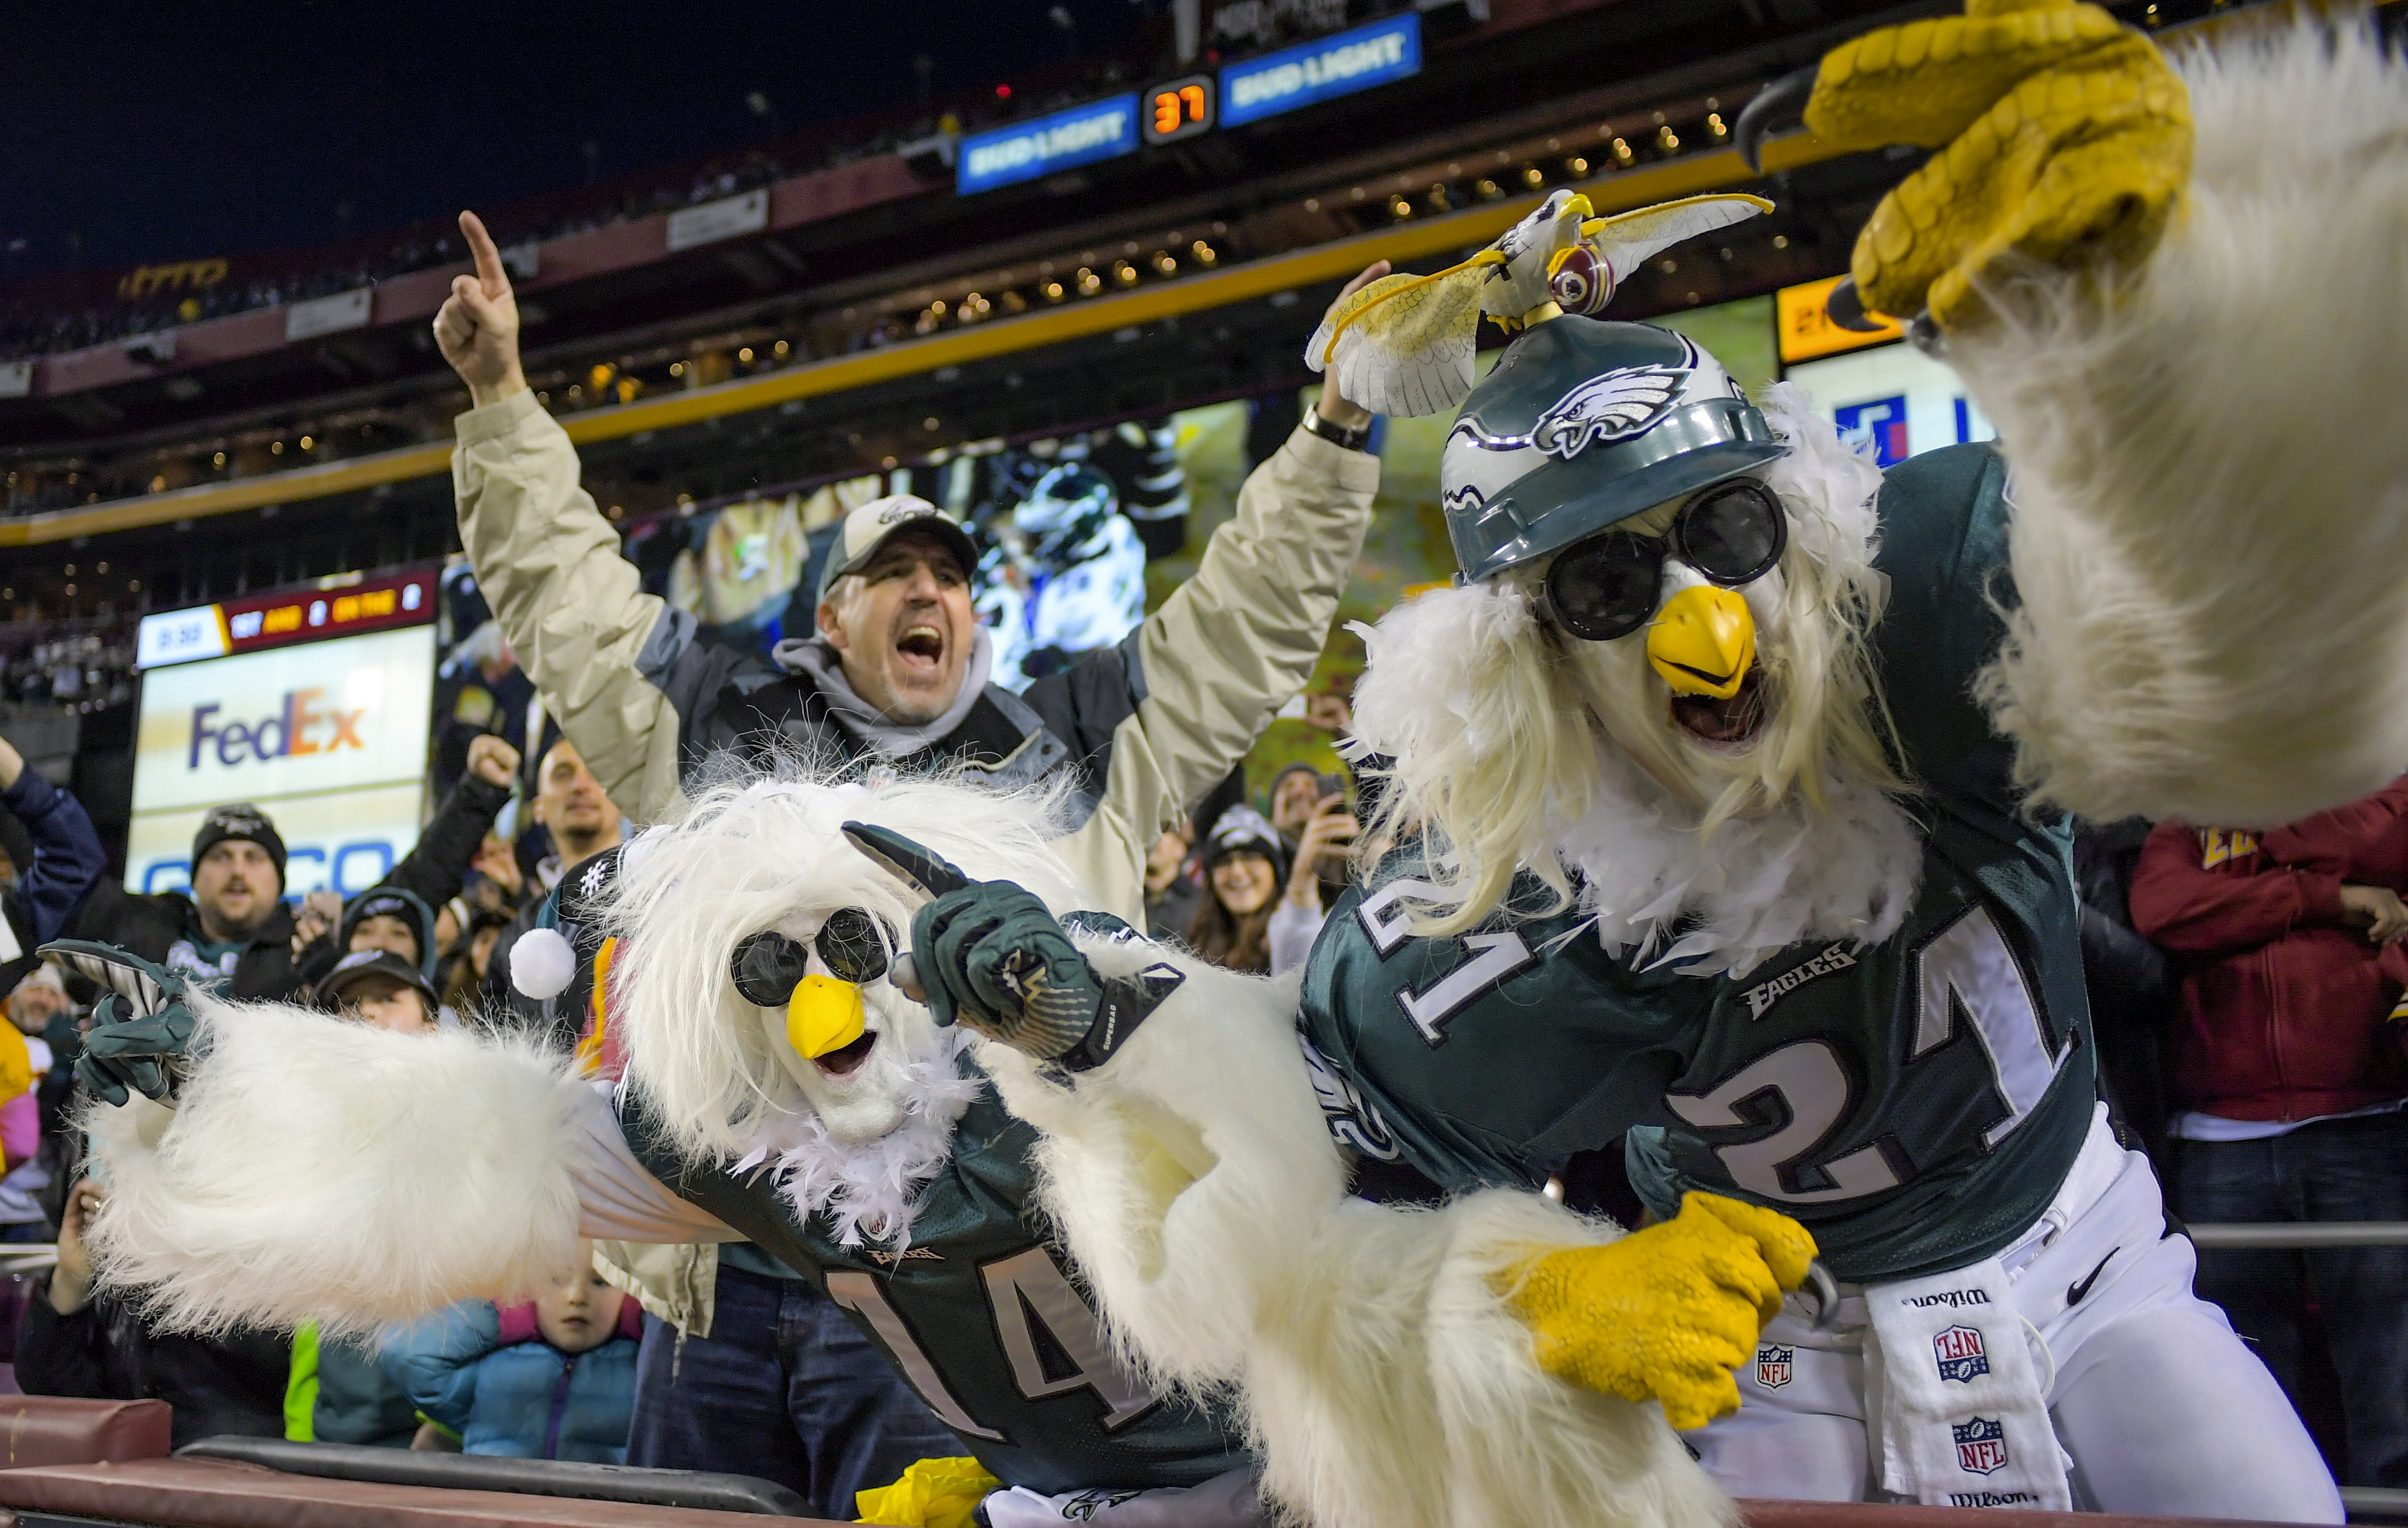 A pair of people dressed up as eagles stand up and cheering during and NFL game between the Philadelphia Eagles and Washington Redskins; nfl cities travel